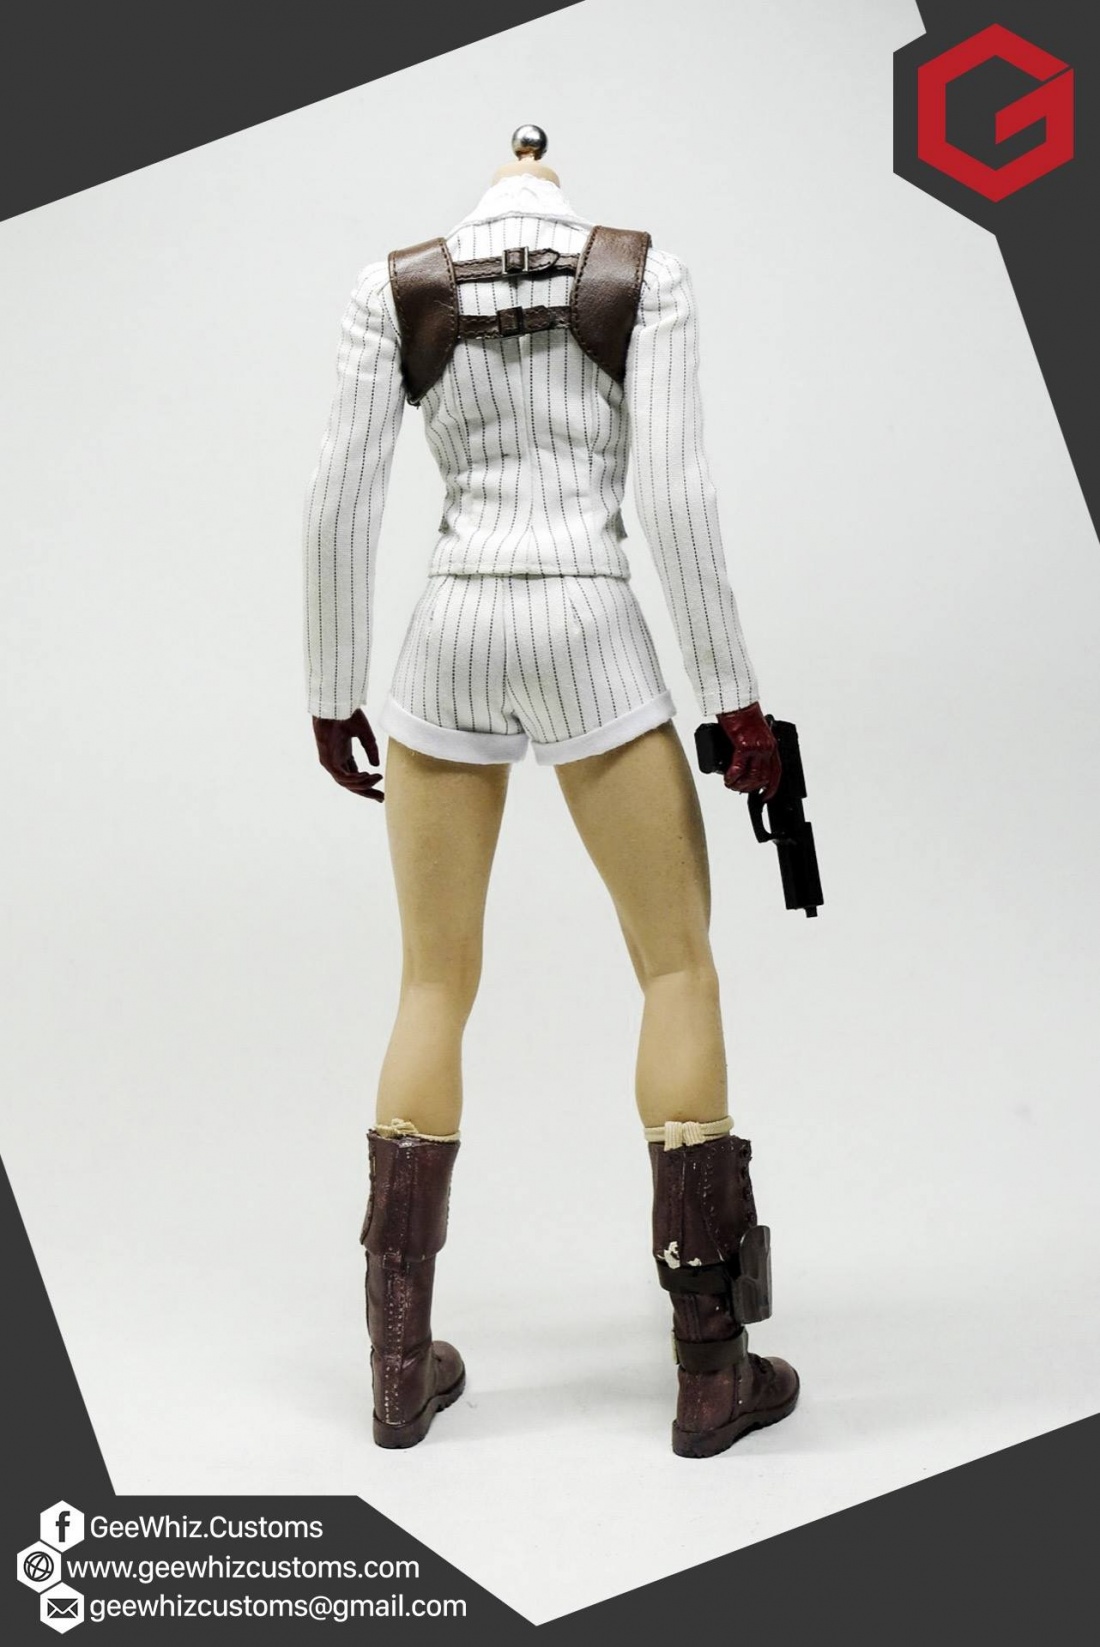 1:6 Scale Bionic Woman Outfit - Geewhiz Customs